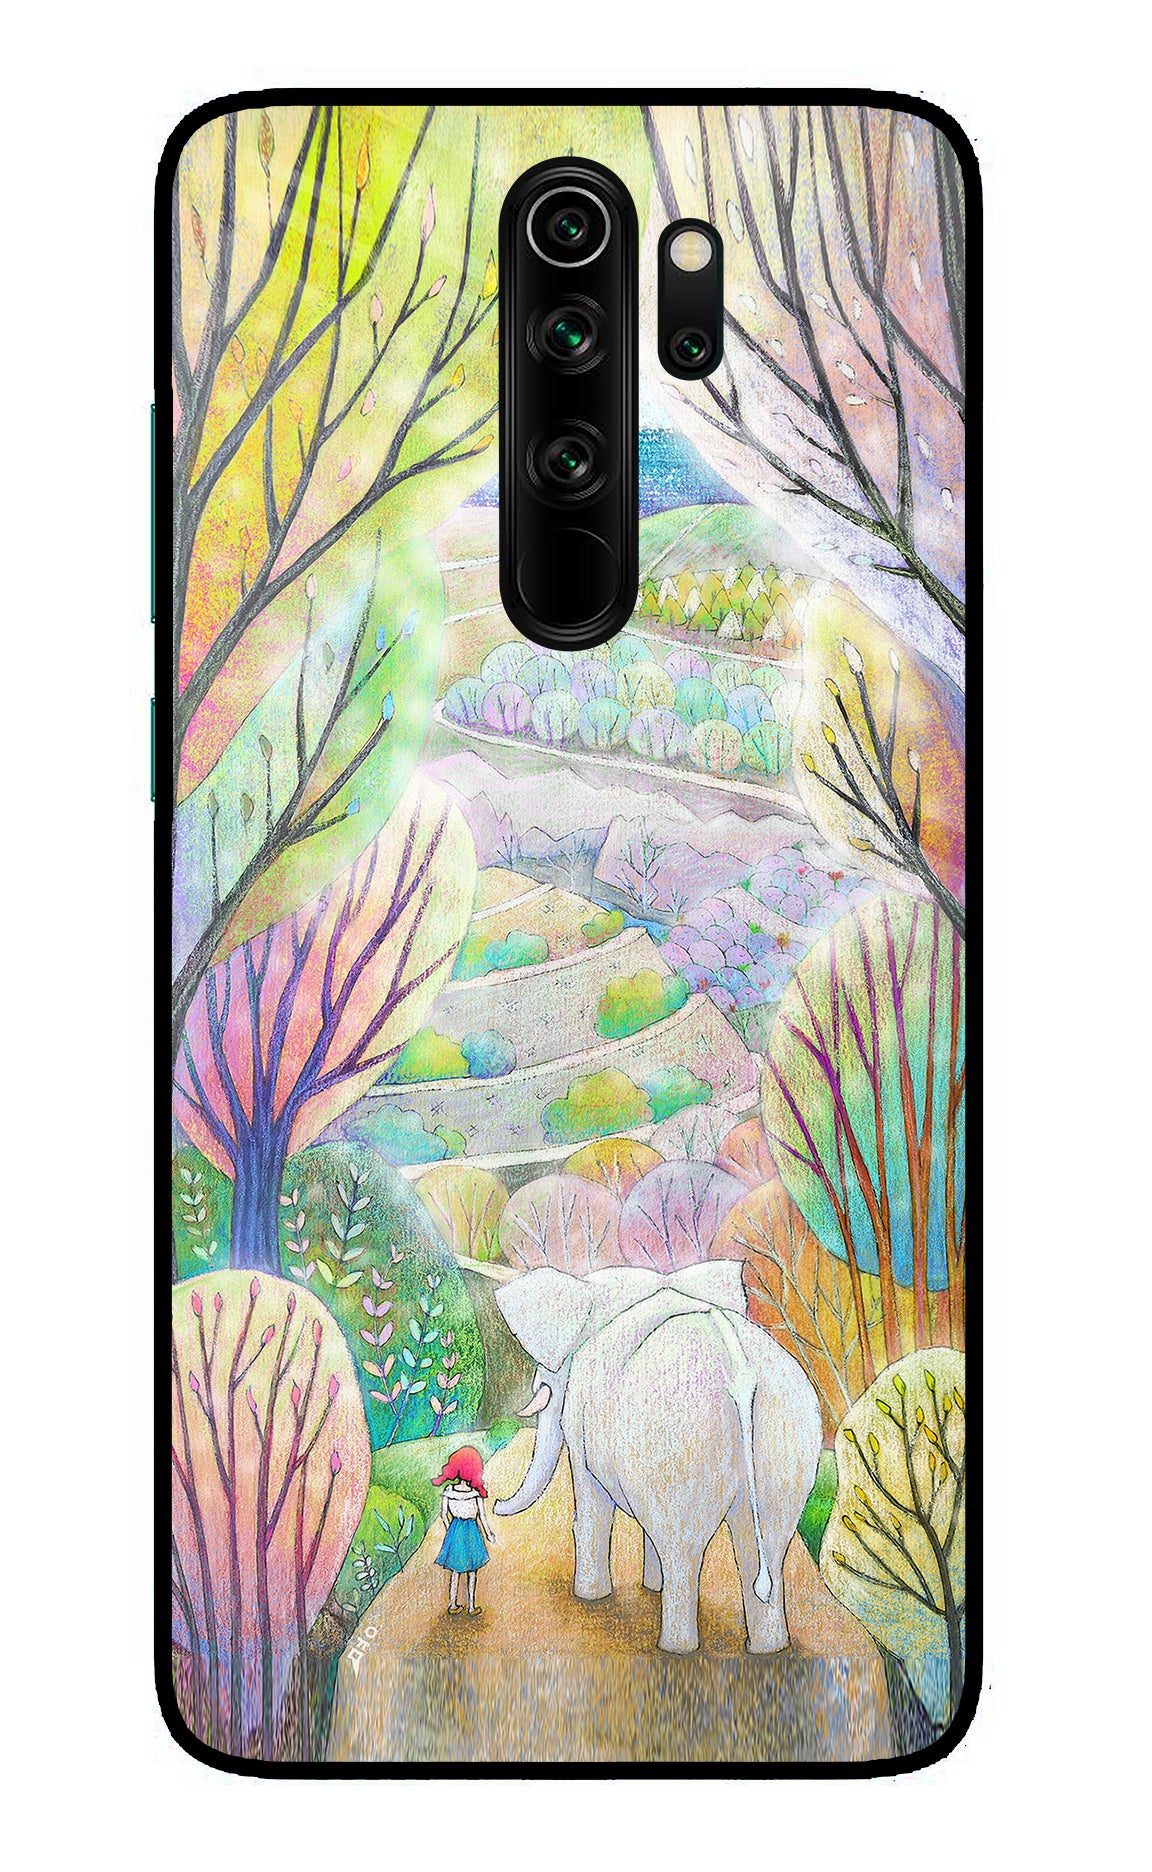 Nature Painting Redmi Note 8 Pro Back Cover